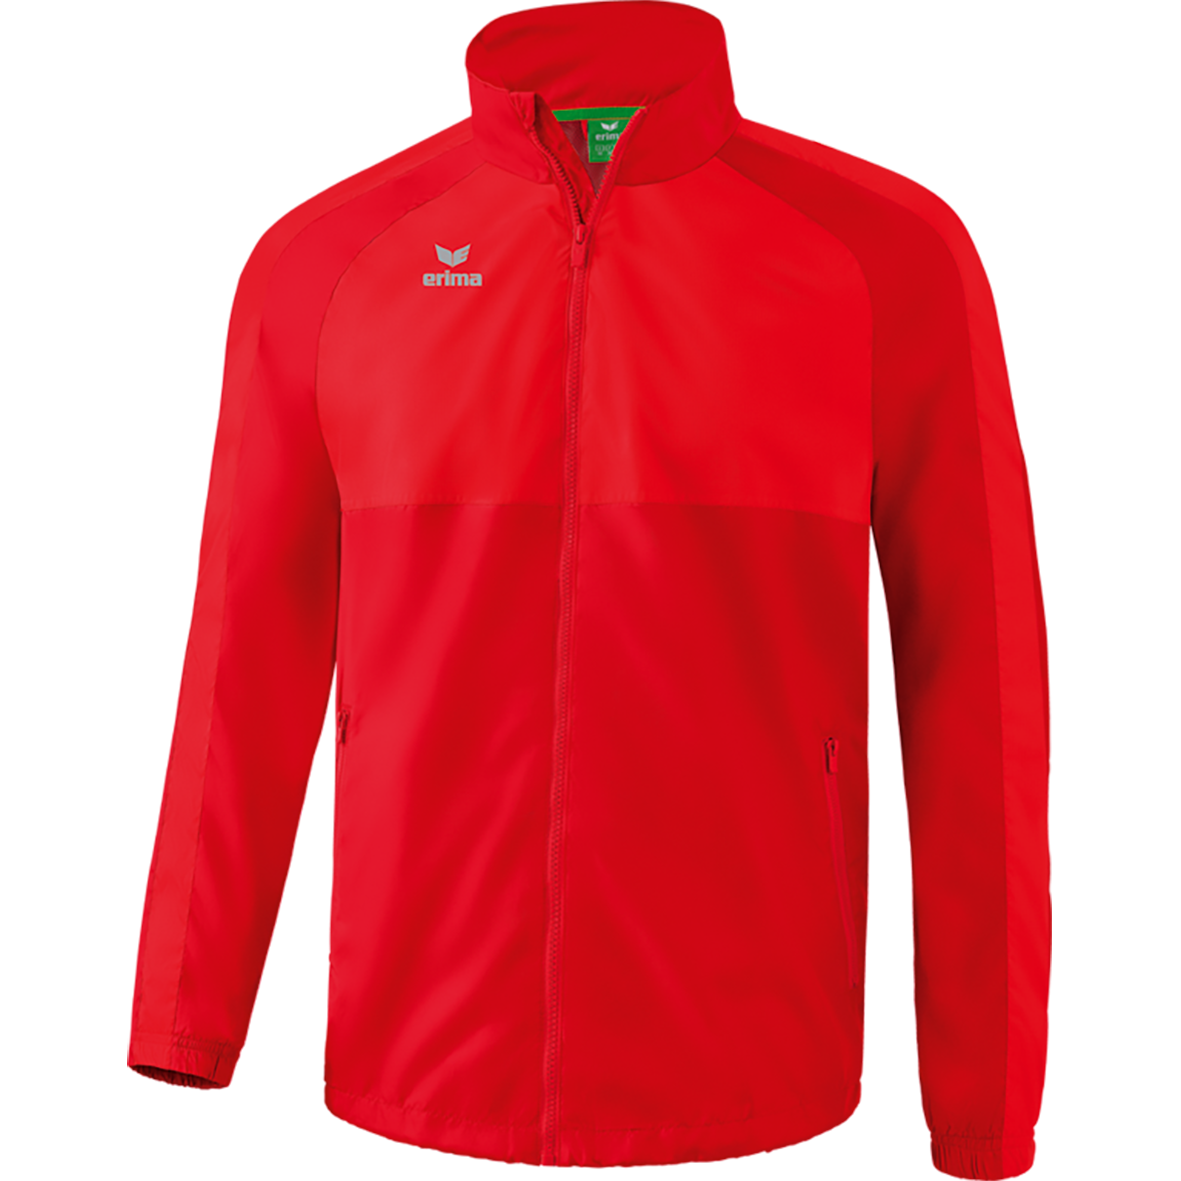 ANORACK ERIMA TEAM ALL-WEATHER, ROJO HOMBRE.